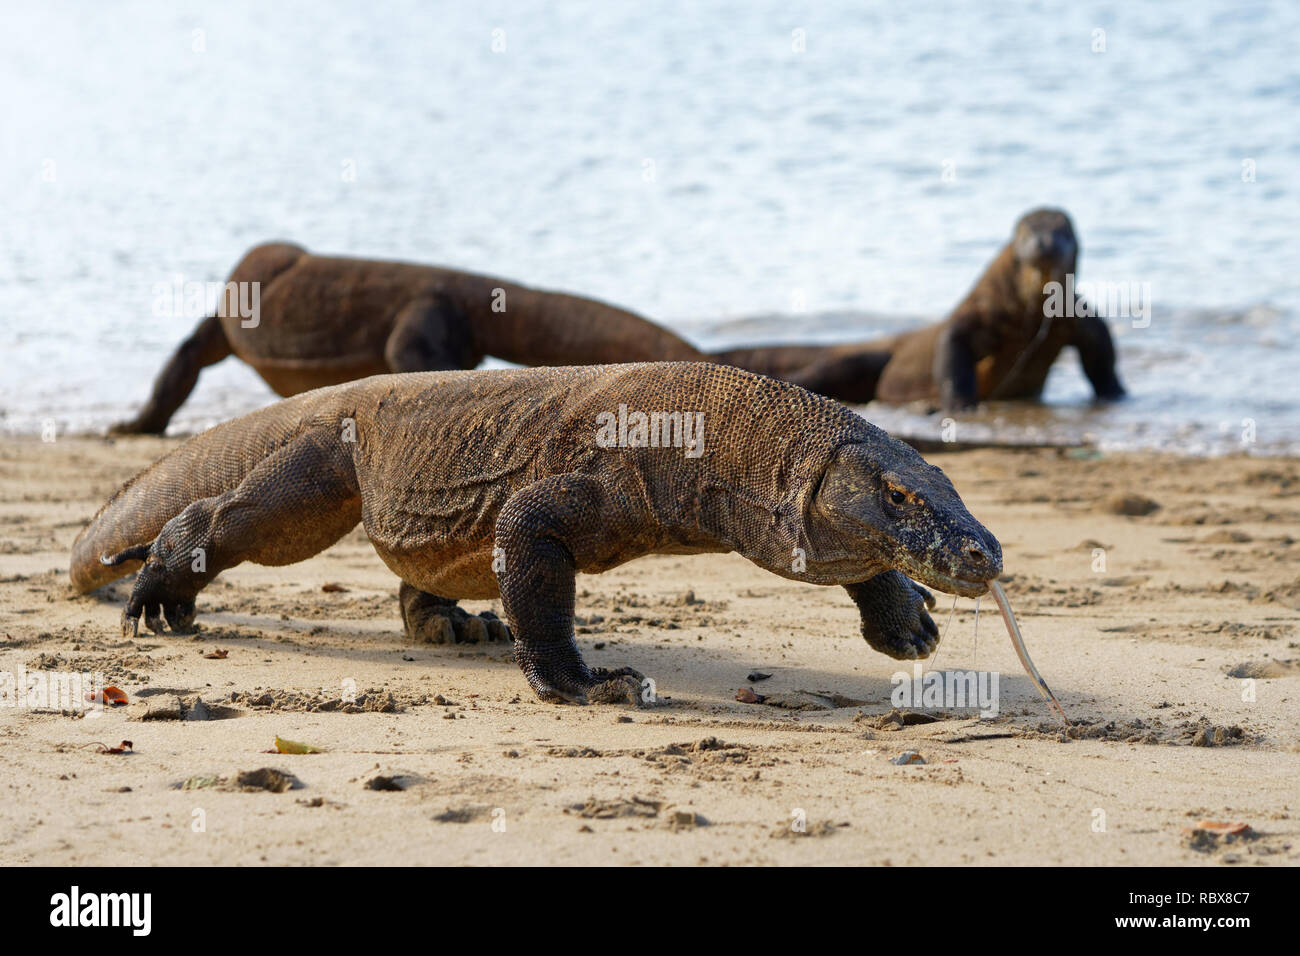 Close-up with three Komodo dragons (Varanus komodoensis) on the beach, the front animal is defining image and is in motion - Location: Indonesia, Komo Stock Photo